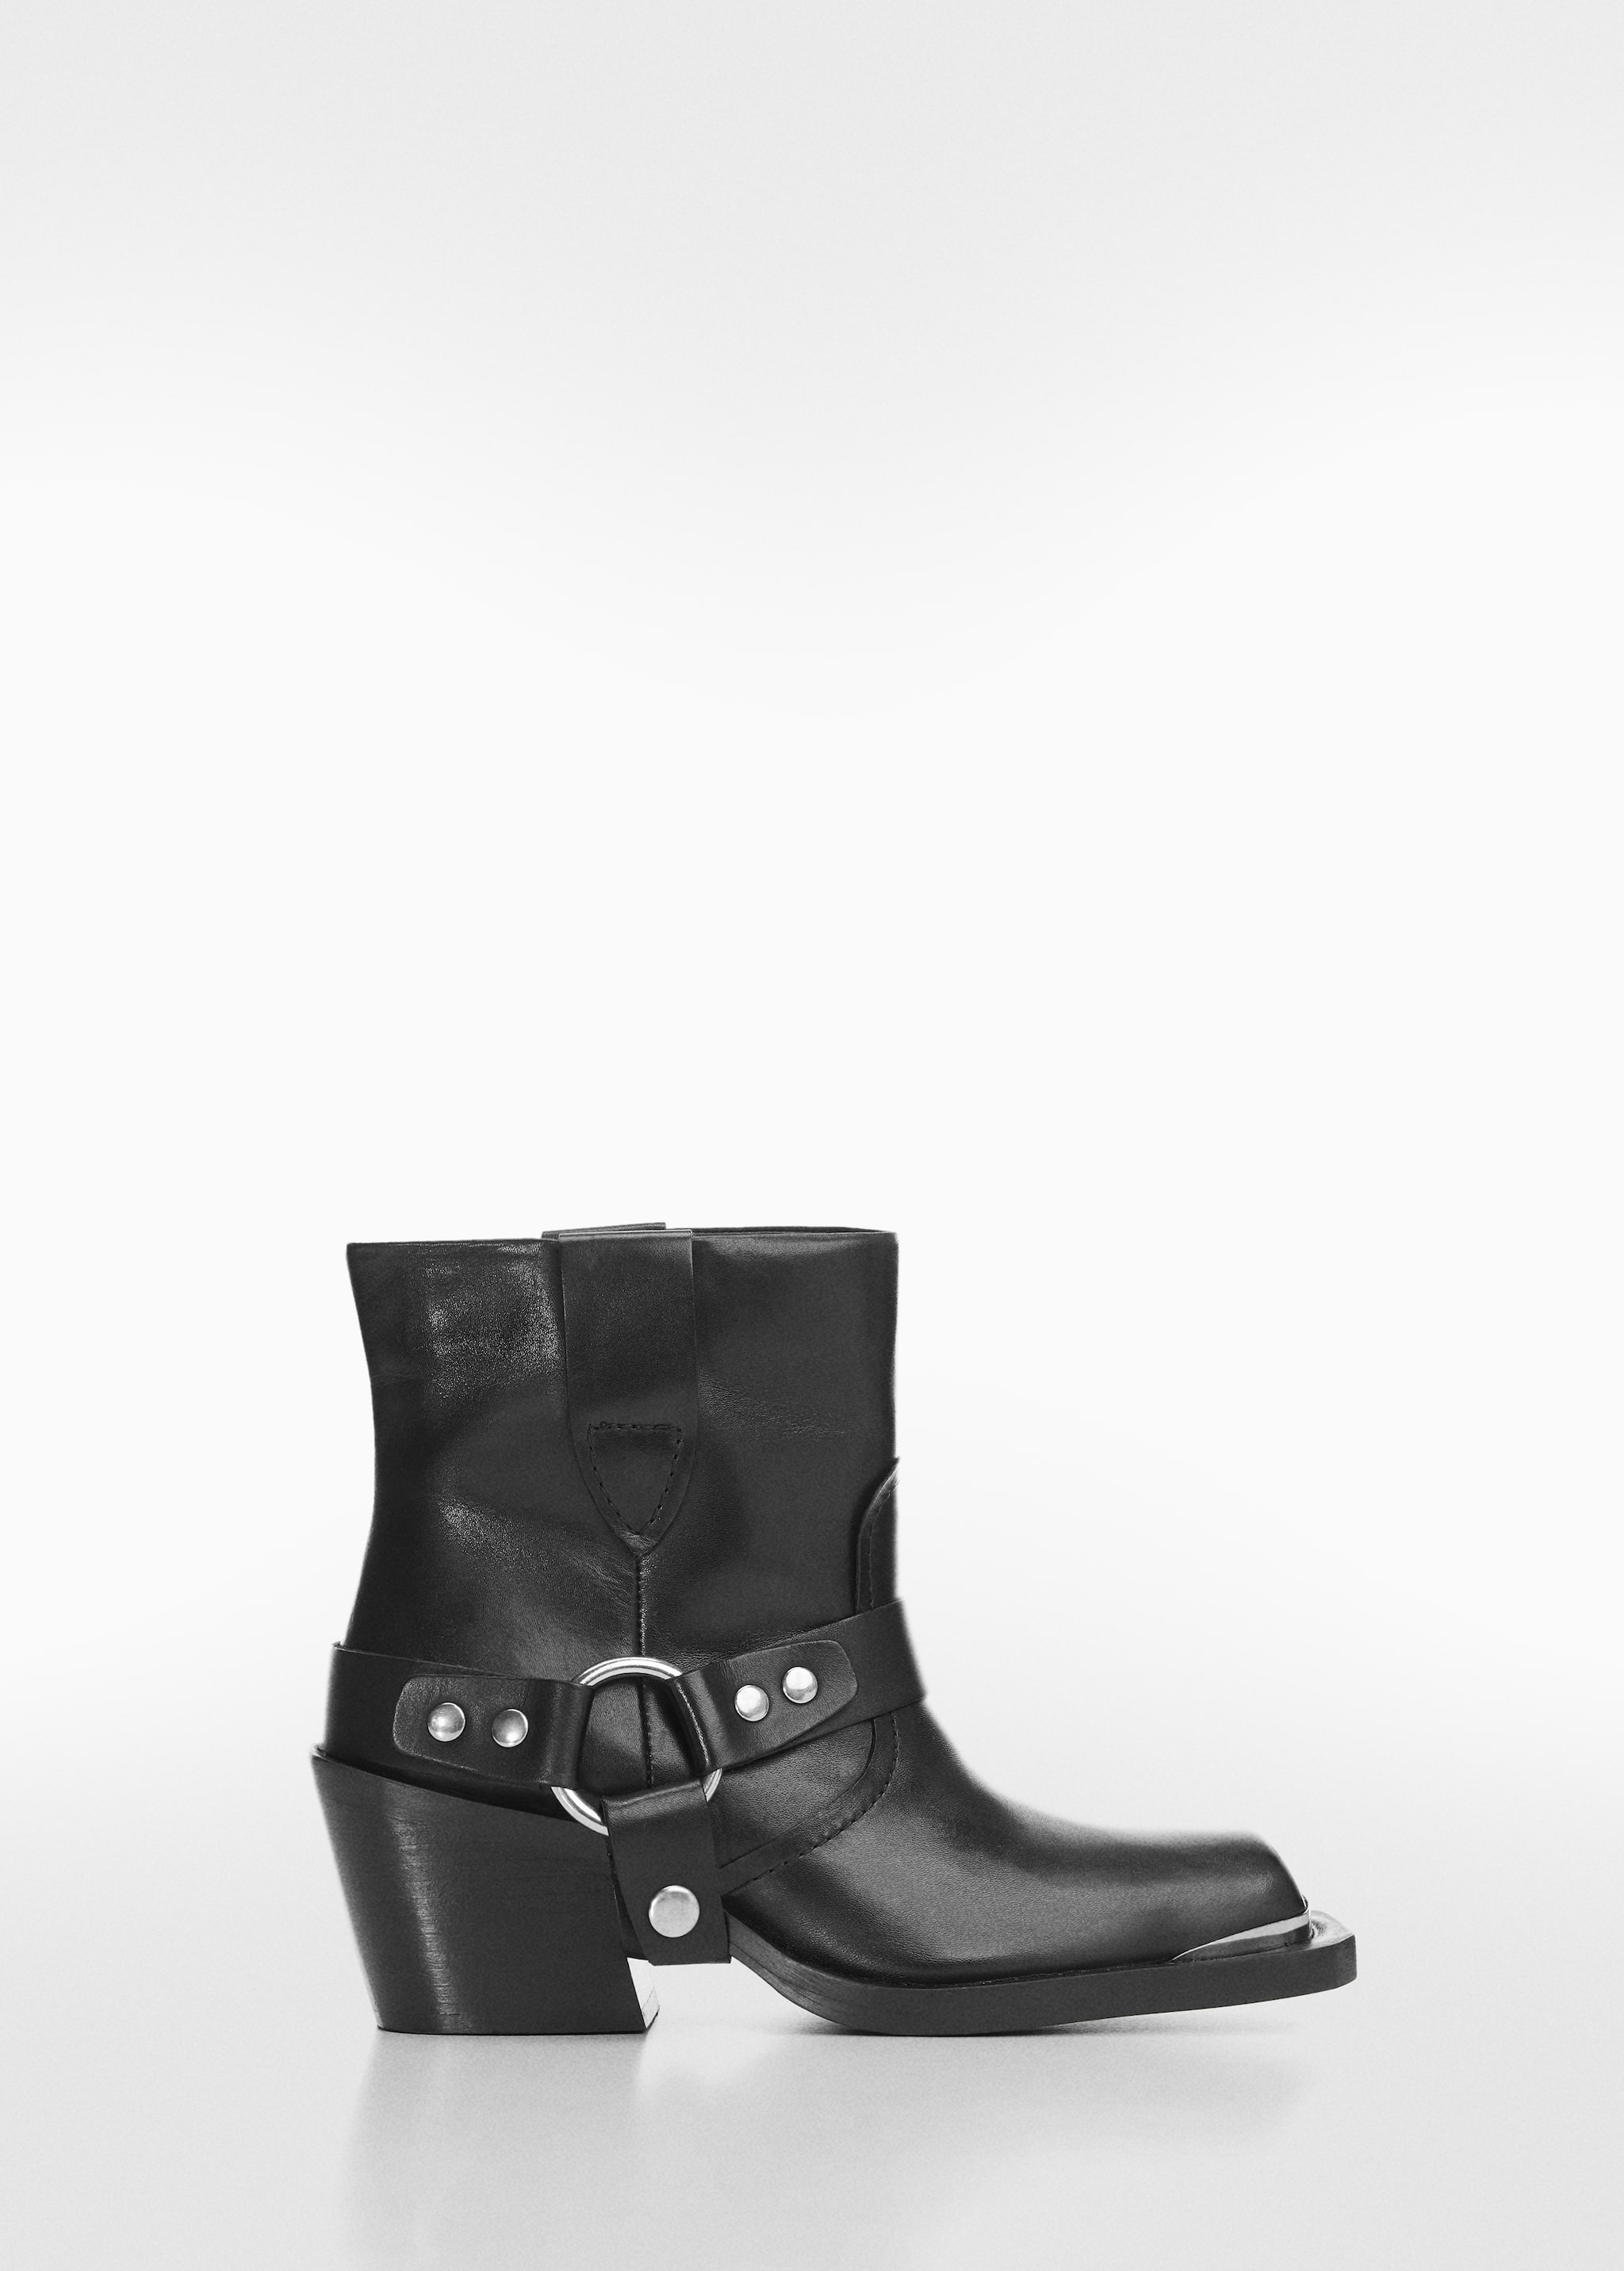 Buckle ankle boots - Article without model